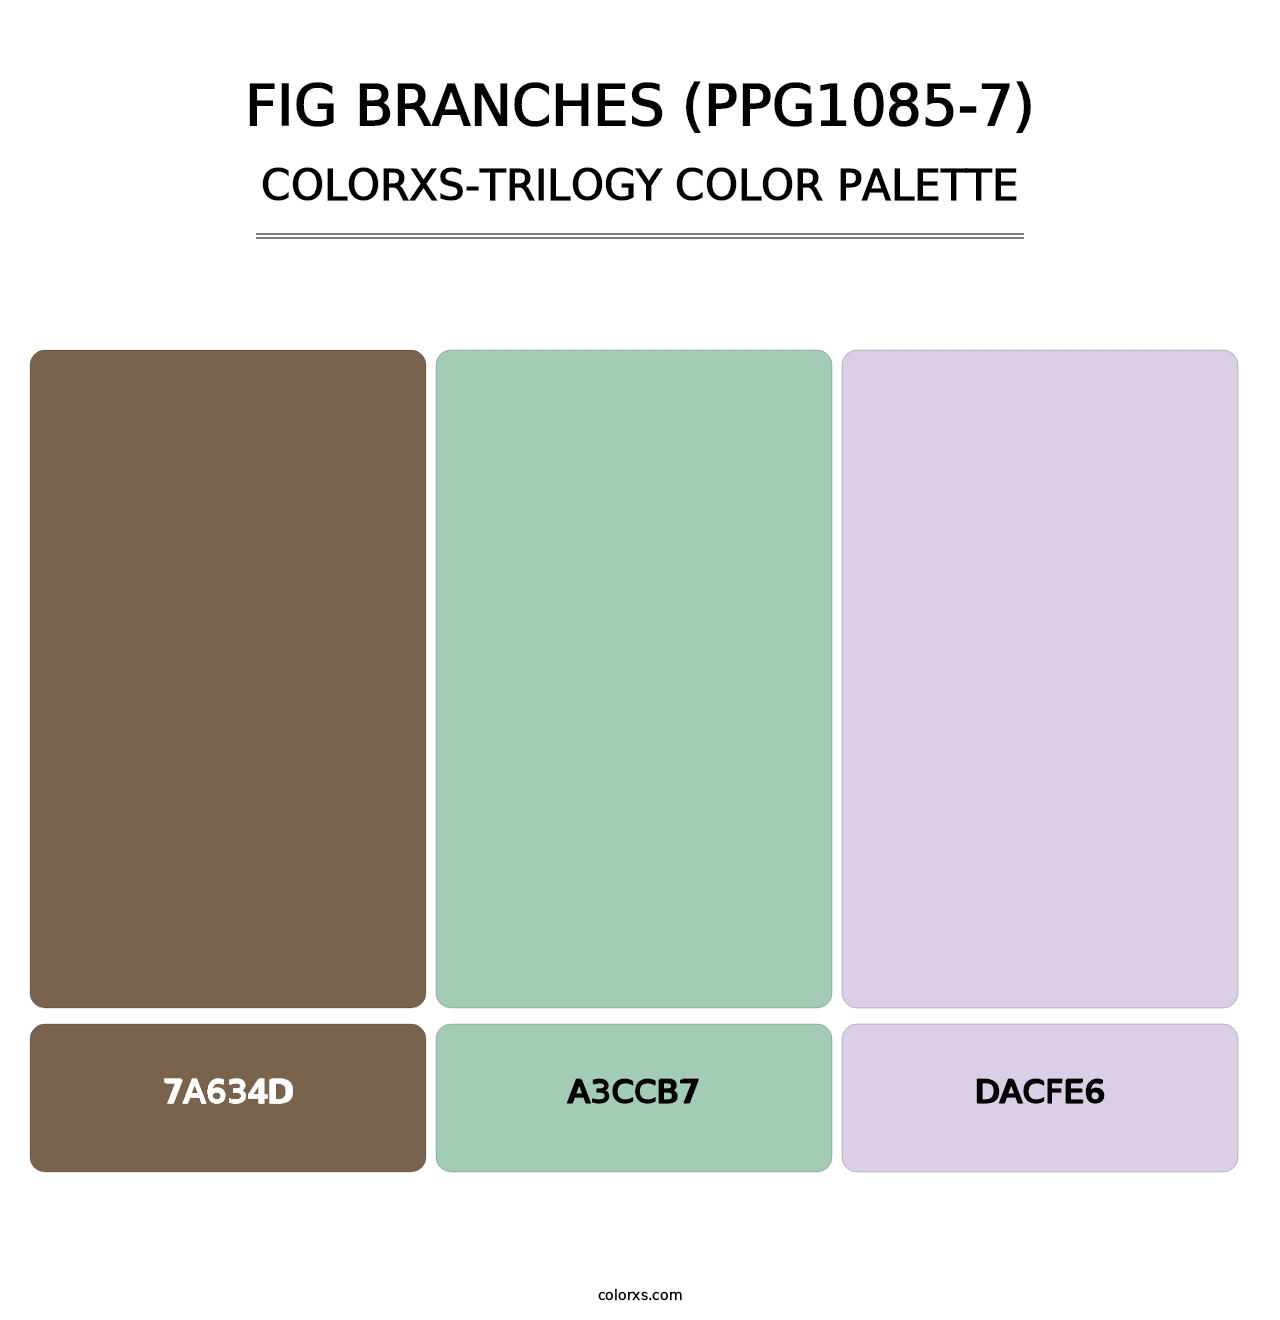 Fig Branches (PPG1085-7) - Colorxs Trilogy Palette